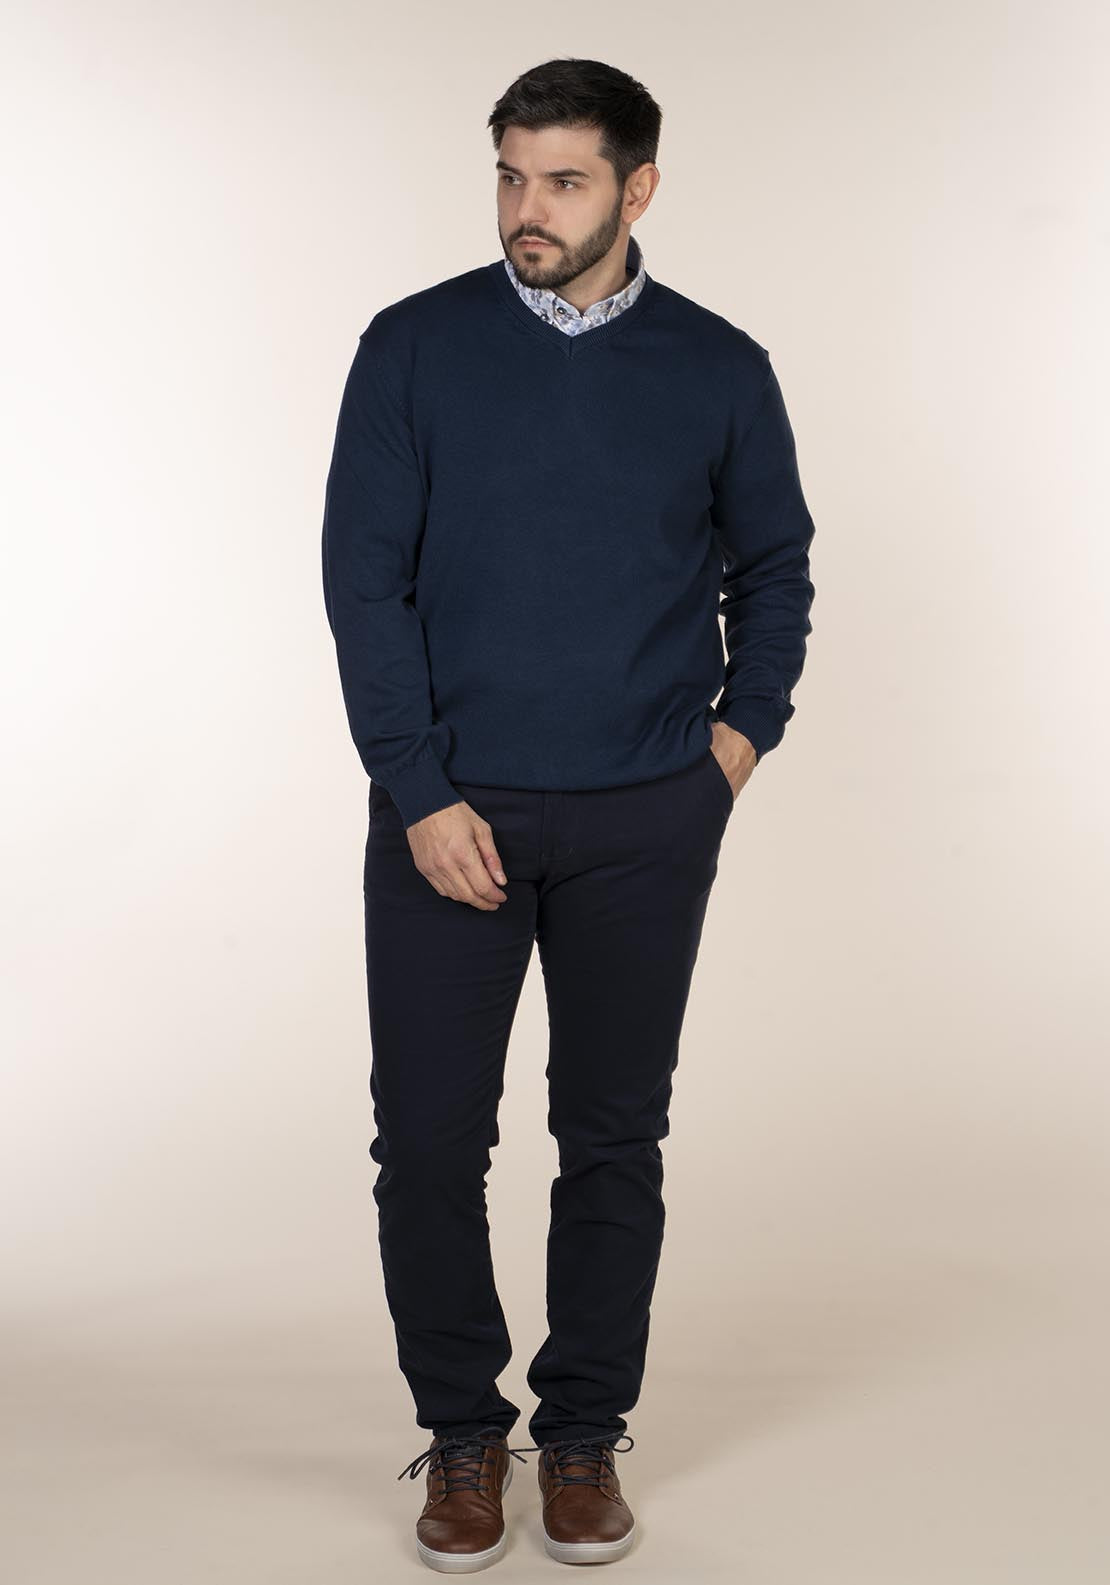 Yeats Plain Cotton V Neck Sweaters - Blue 1 Shaws Department Stores